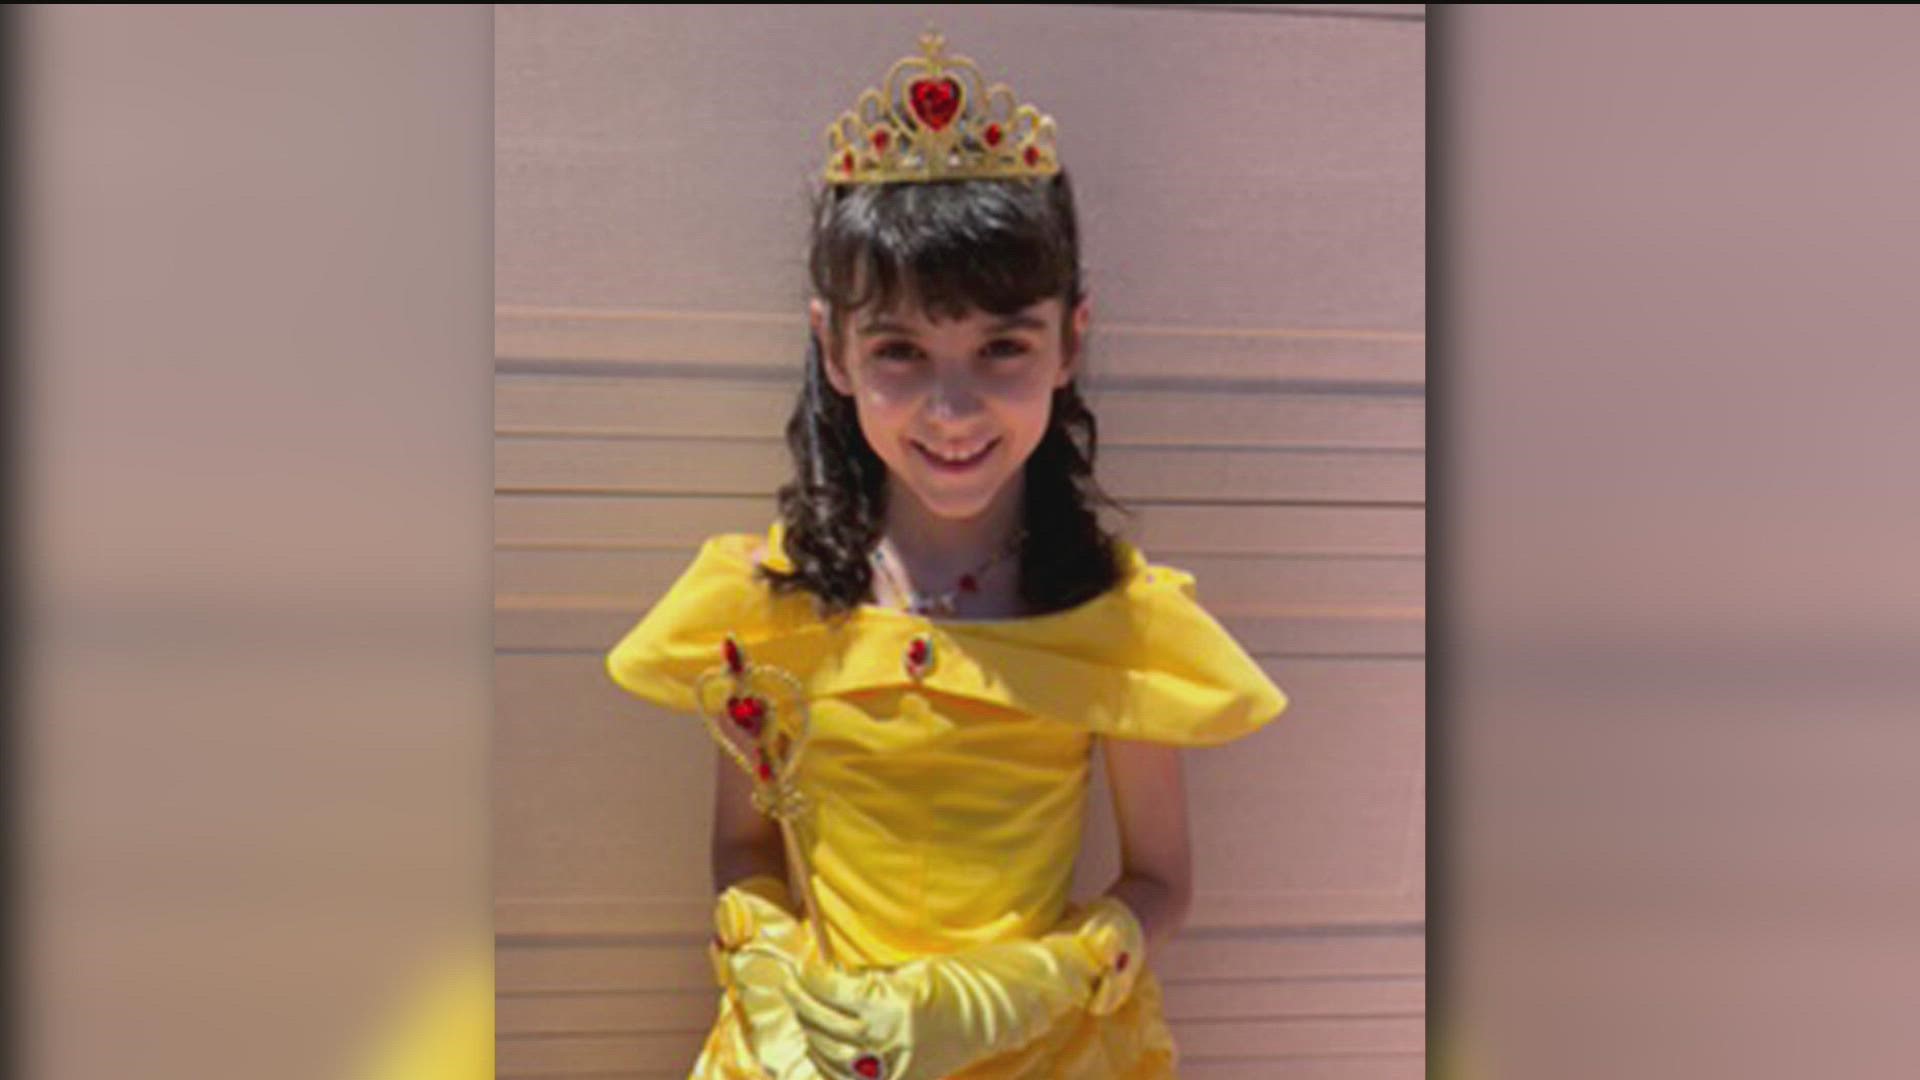 Aarabella McCormack, 11, died of abuse and neglect, according to Child Welfare Services.